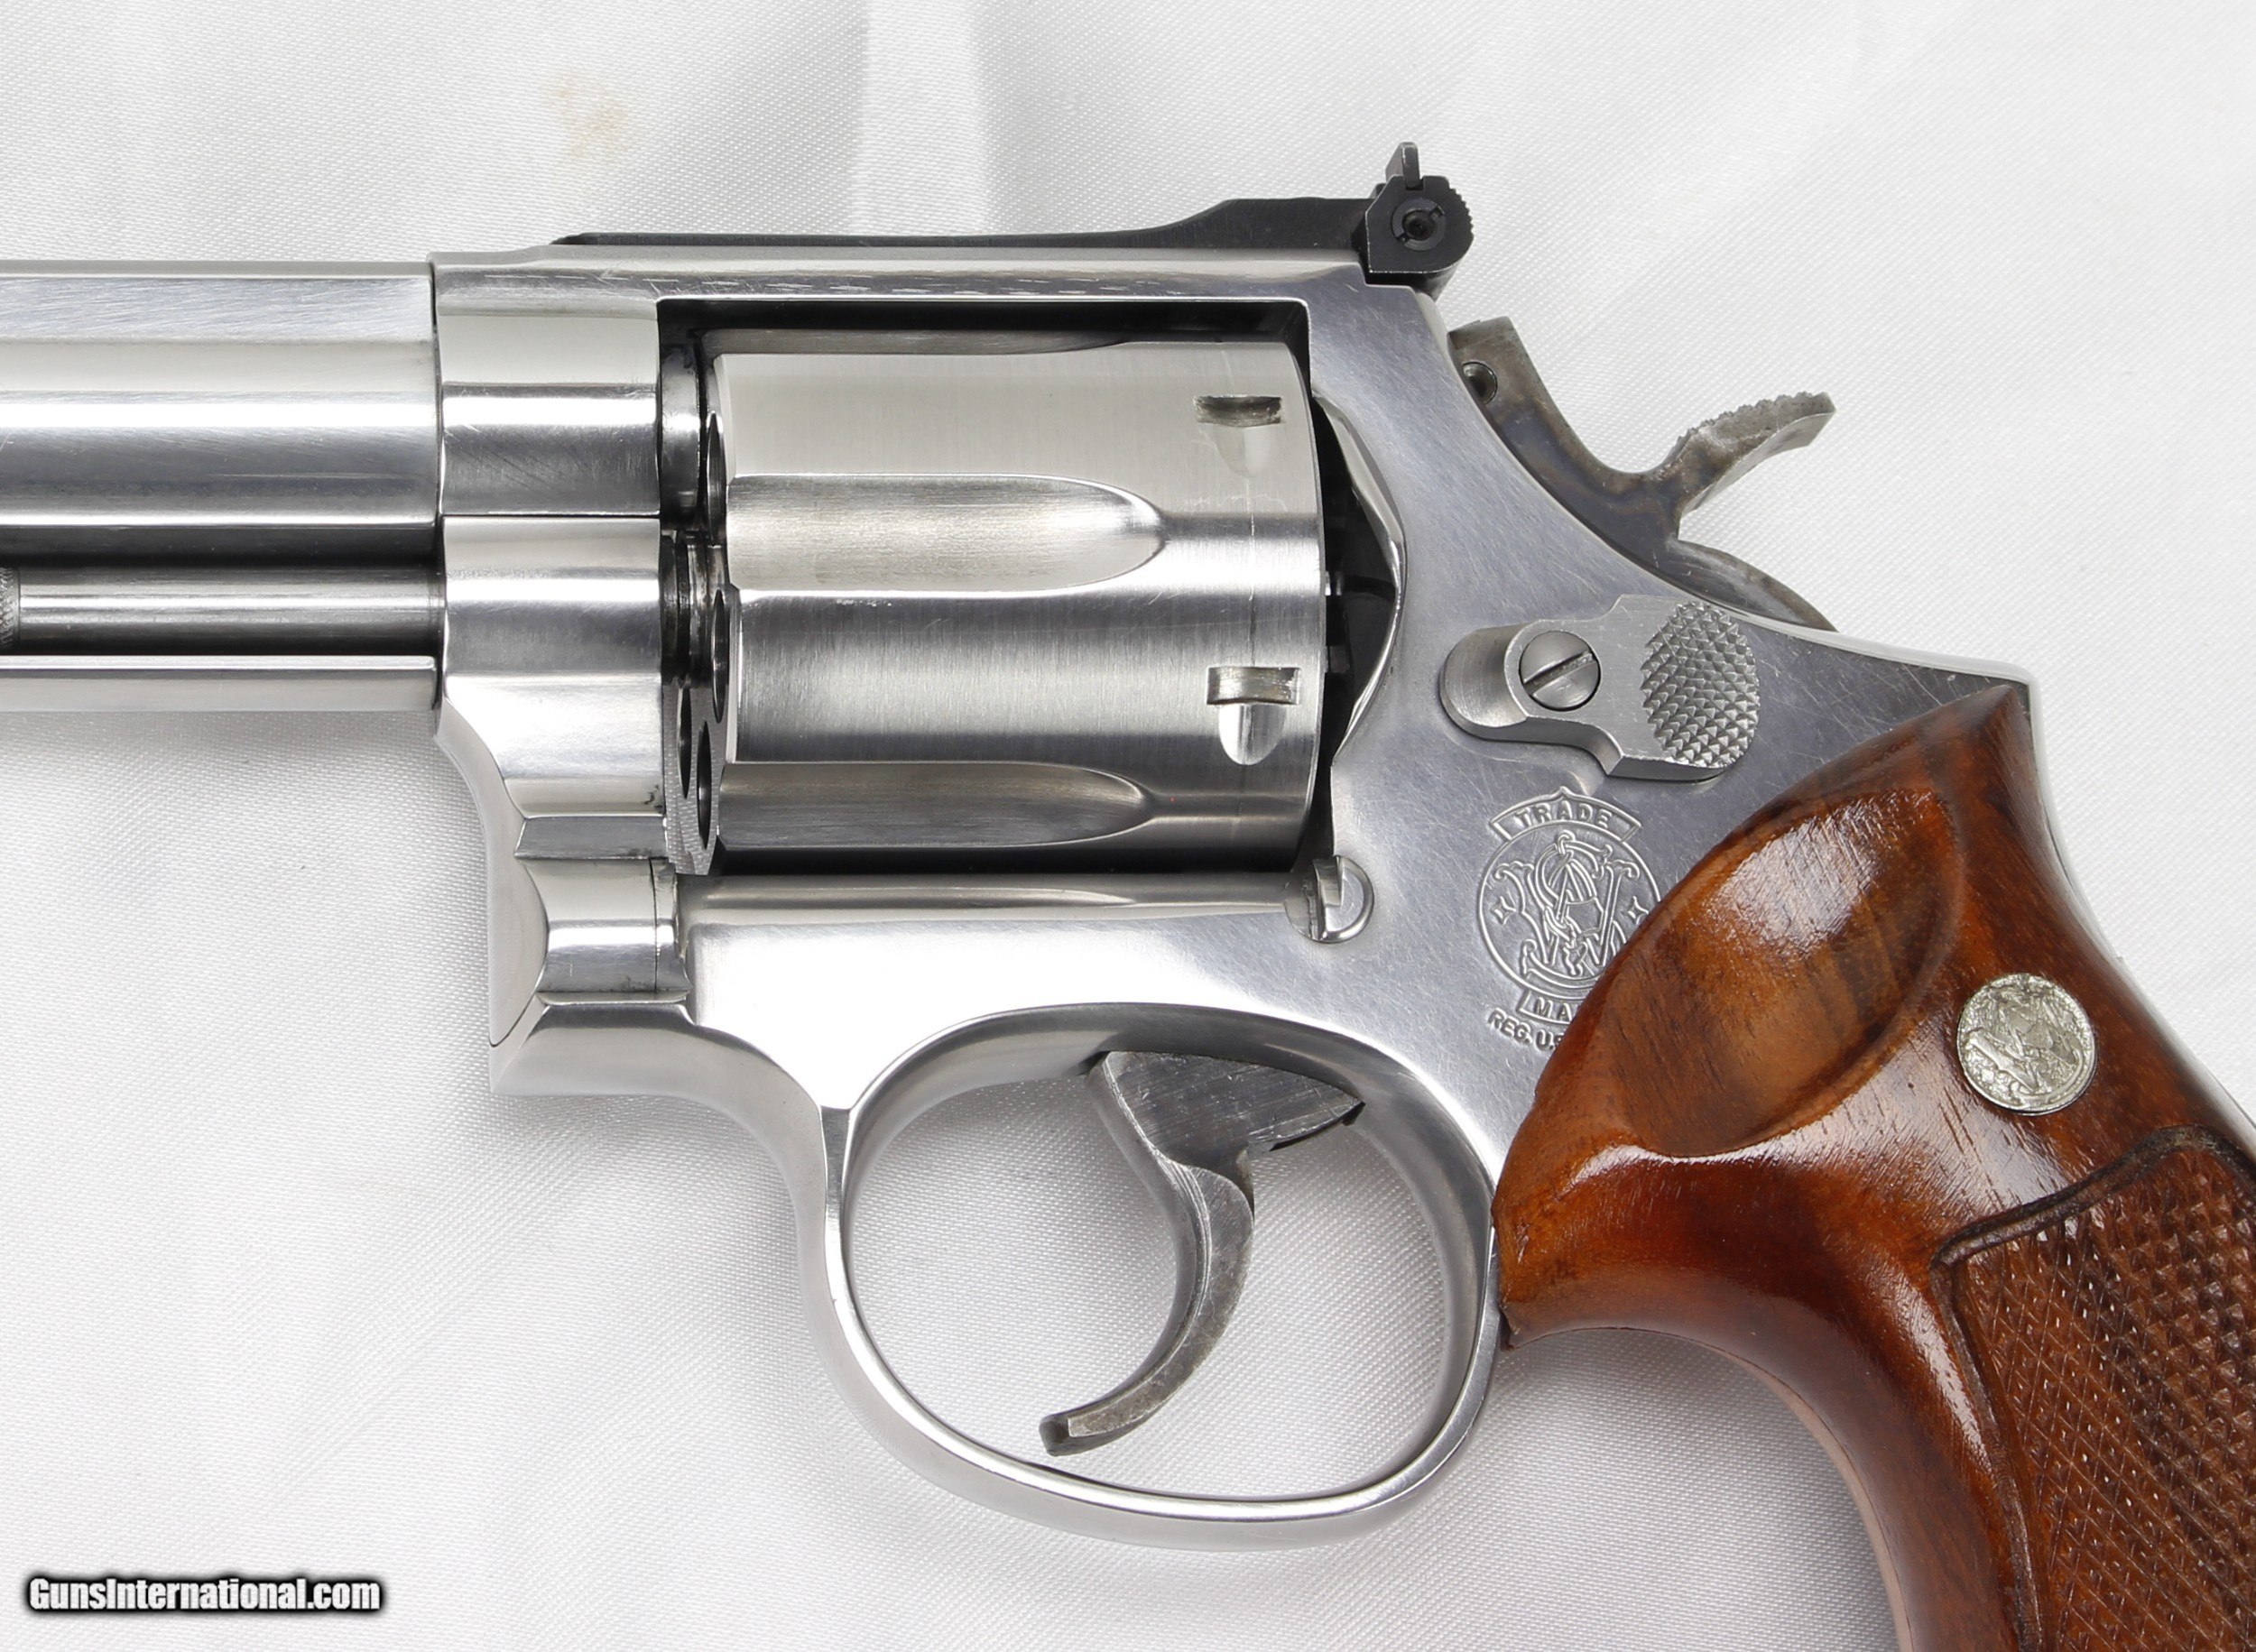 S&W Model 686-4 Revolver .357 Magnum (1993-94) STAINLESS STEEL